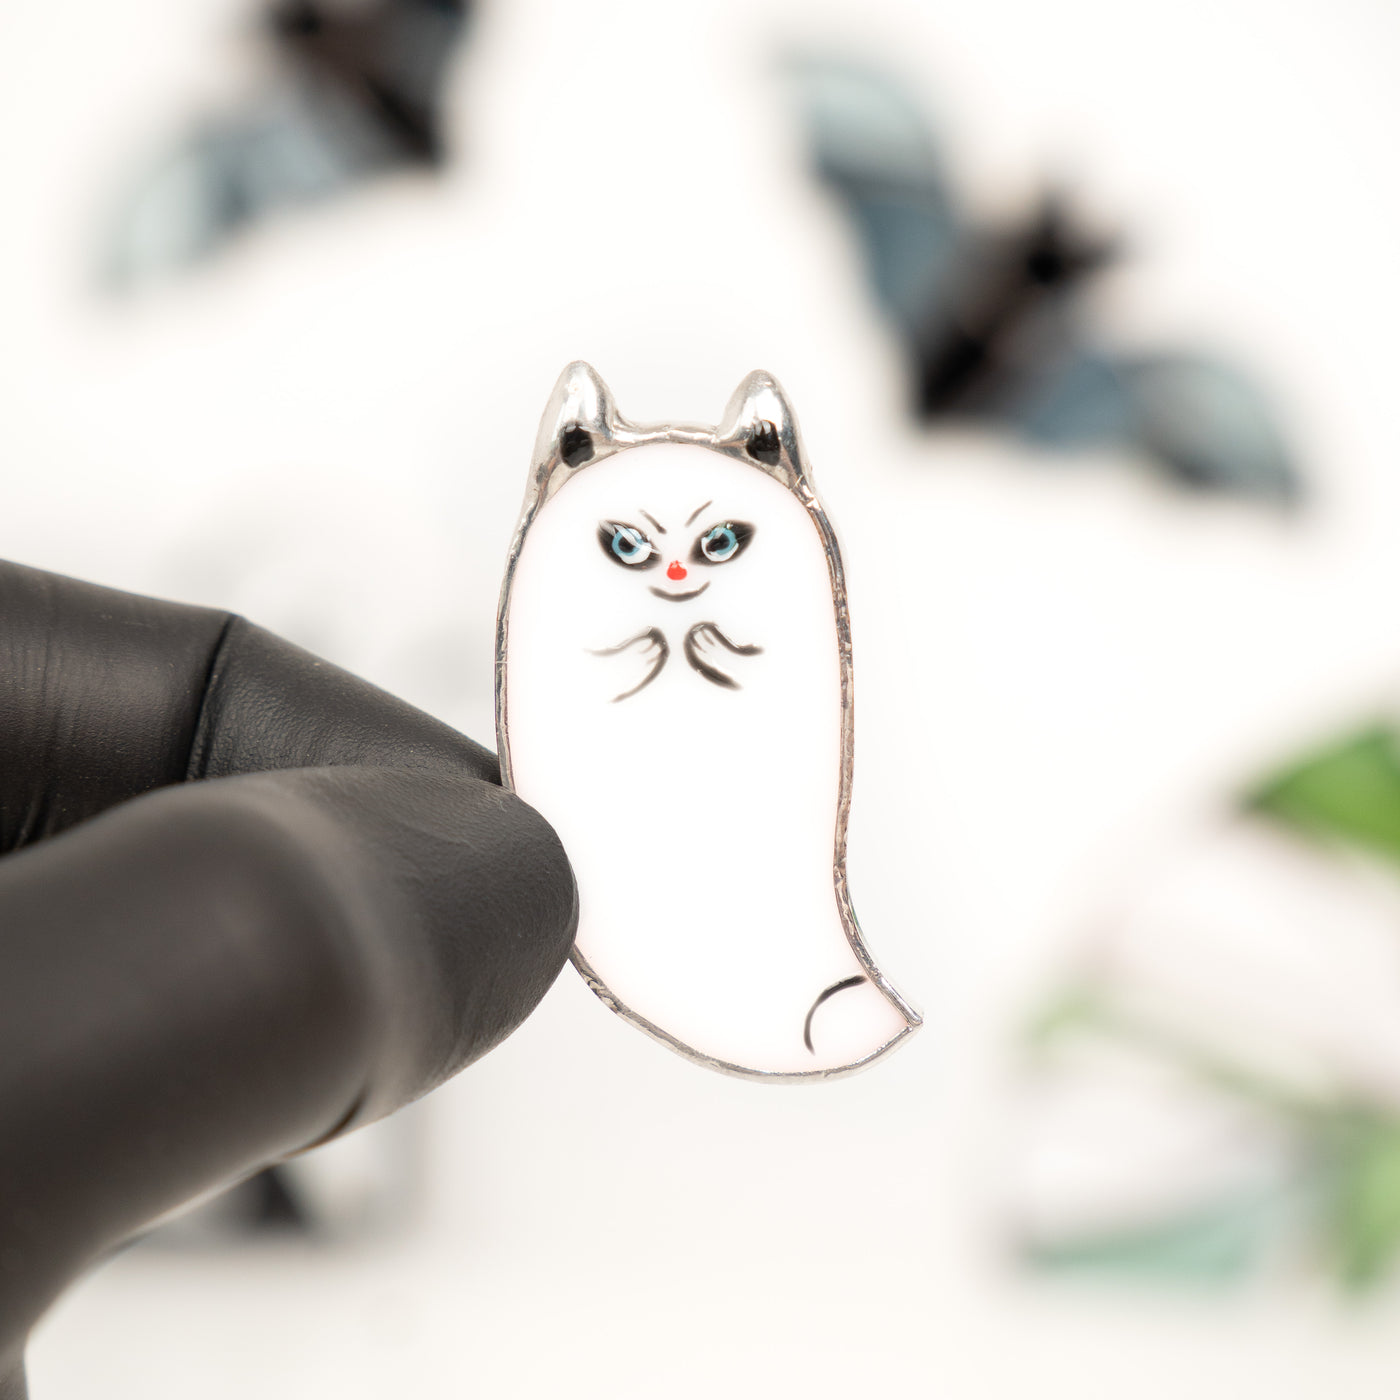 Stained glass cat ghost brooch